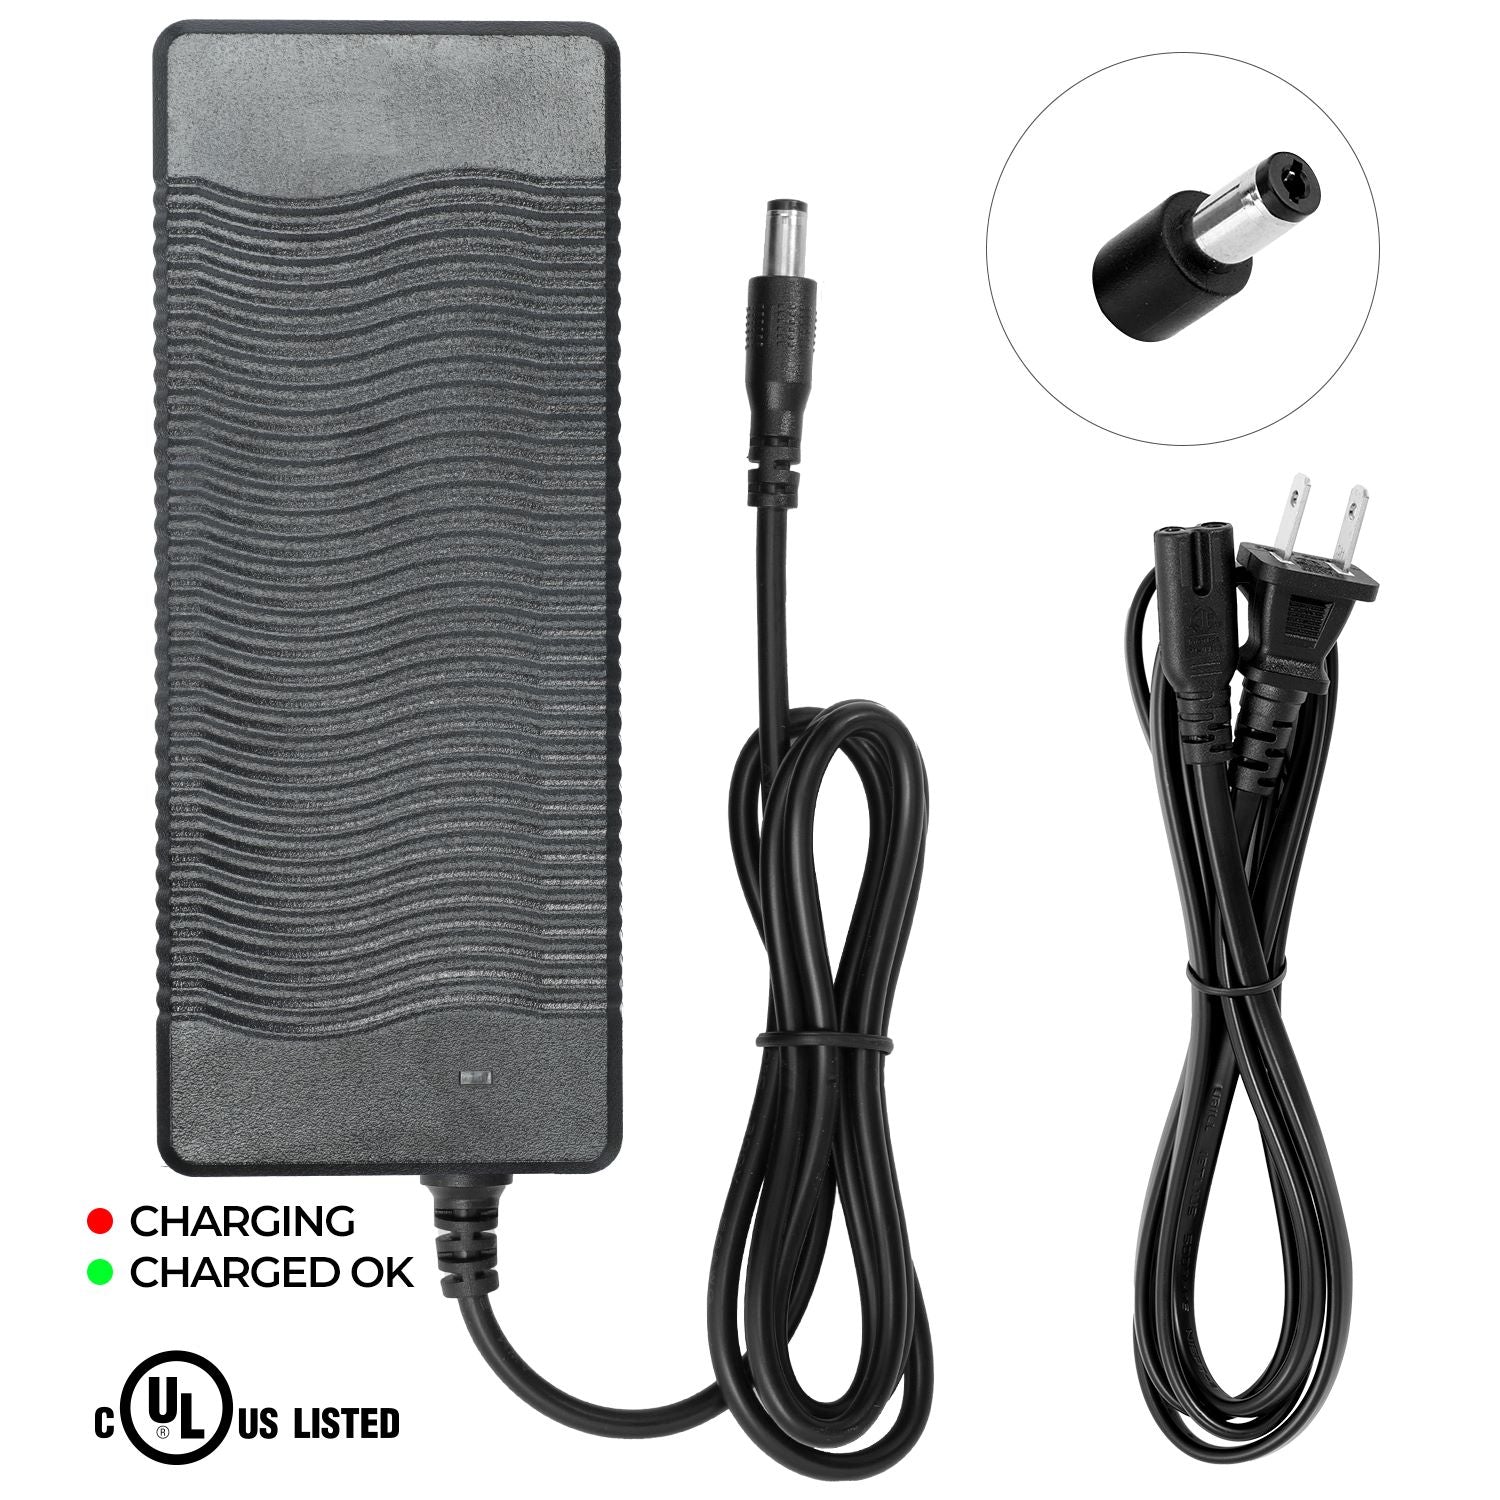 Charger for Surface 604 V Rook eBike